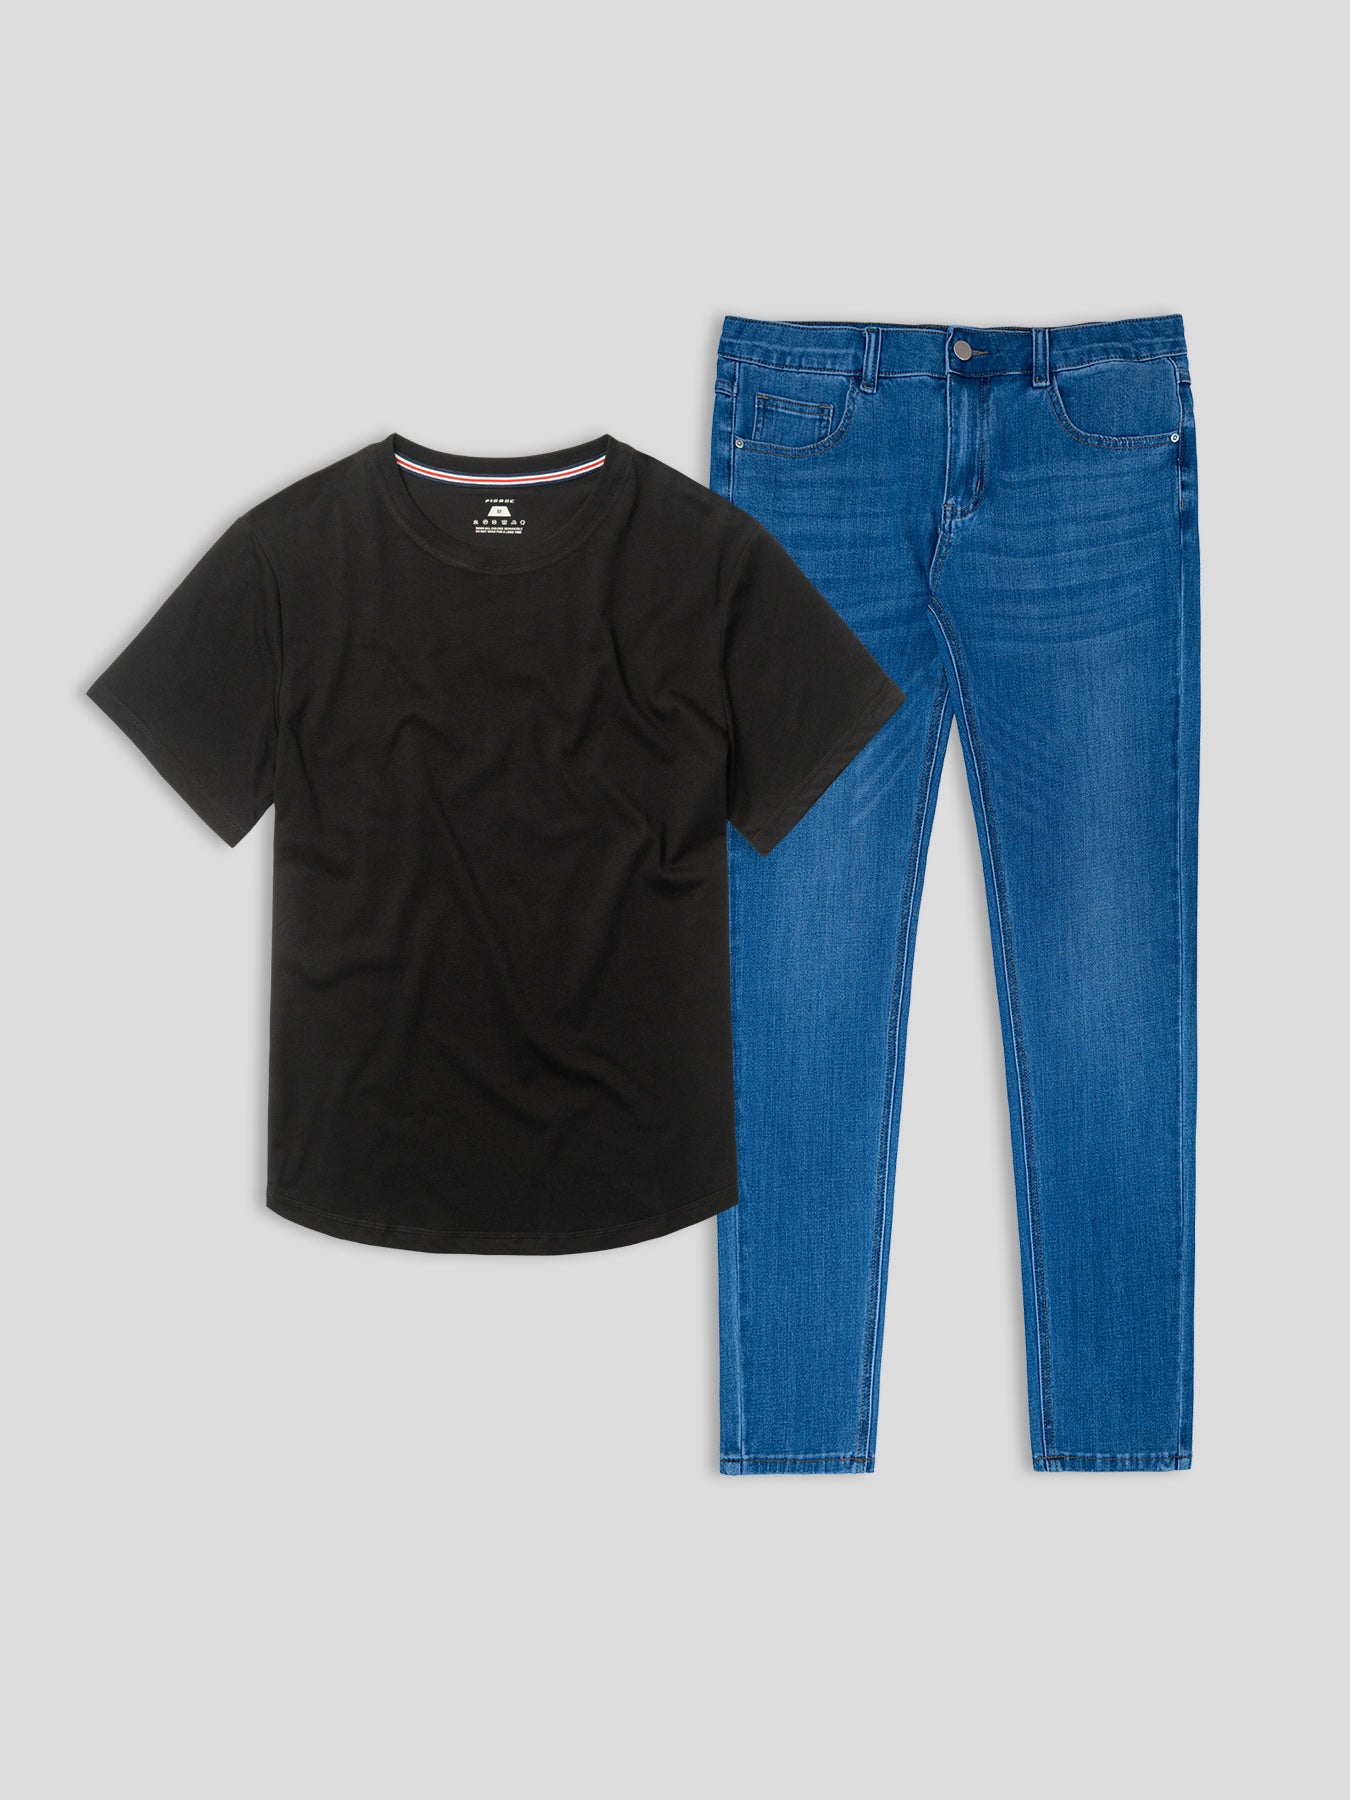 Daily Casual Tee and Jeans Set: Slim Fit